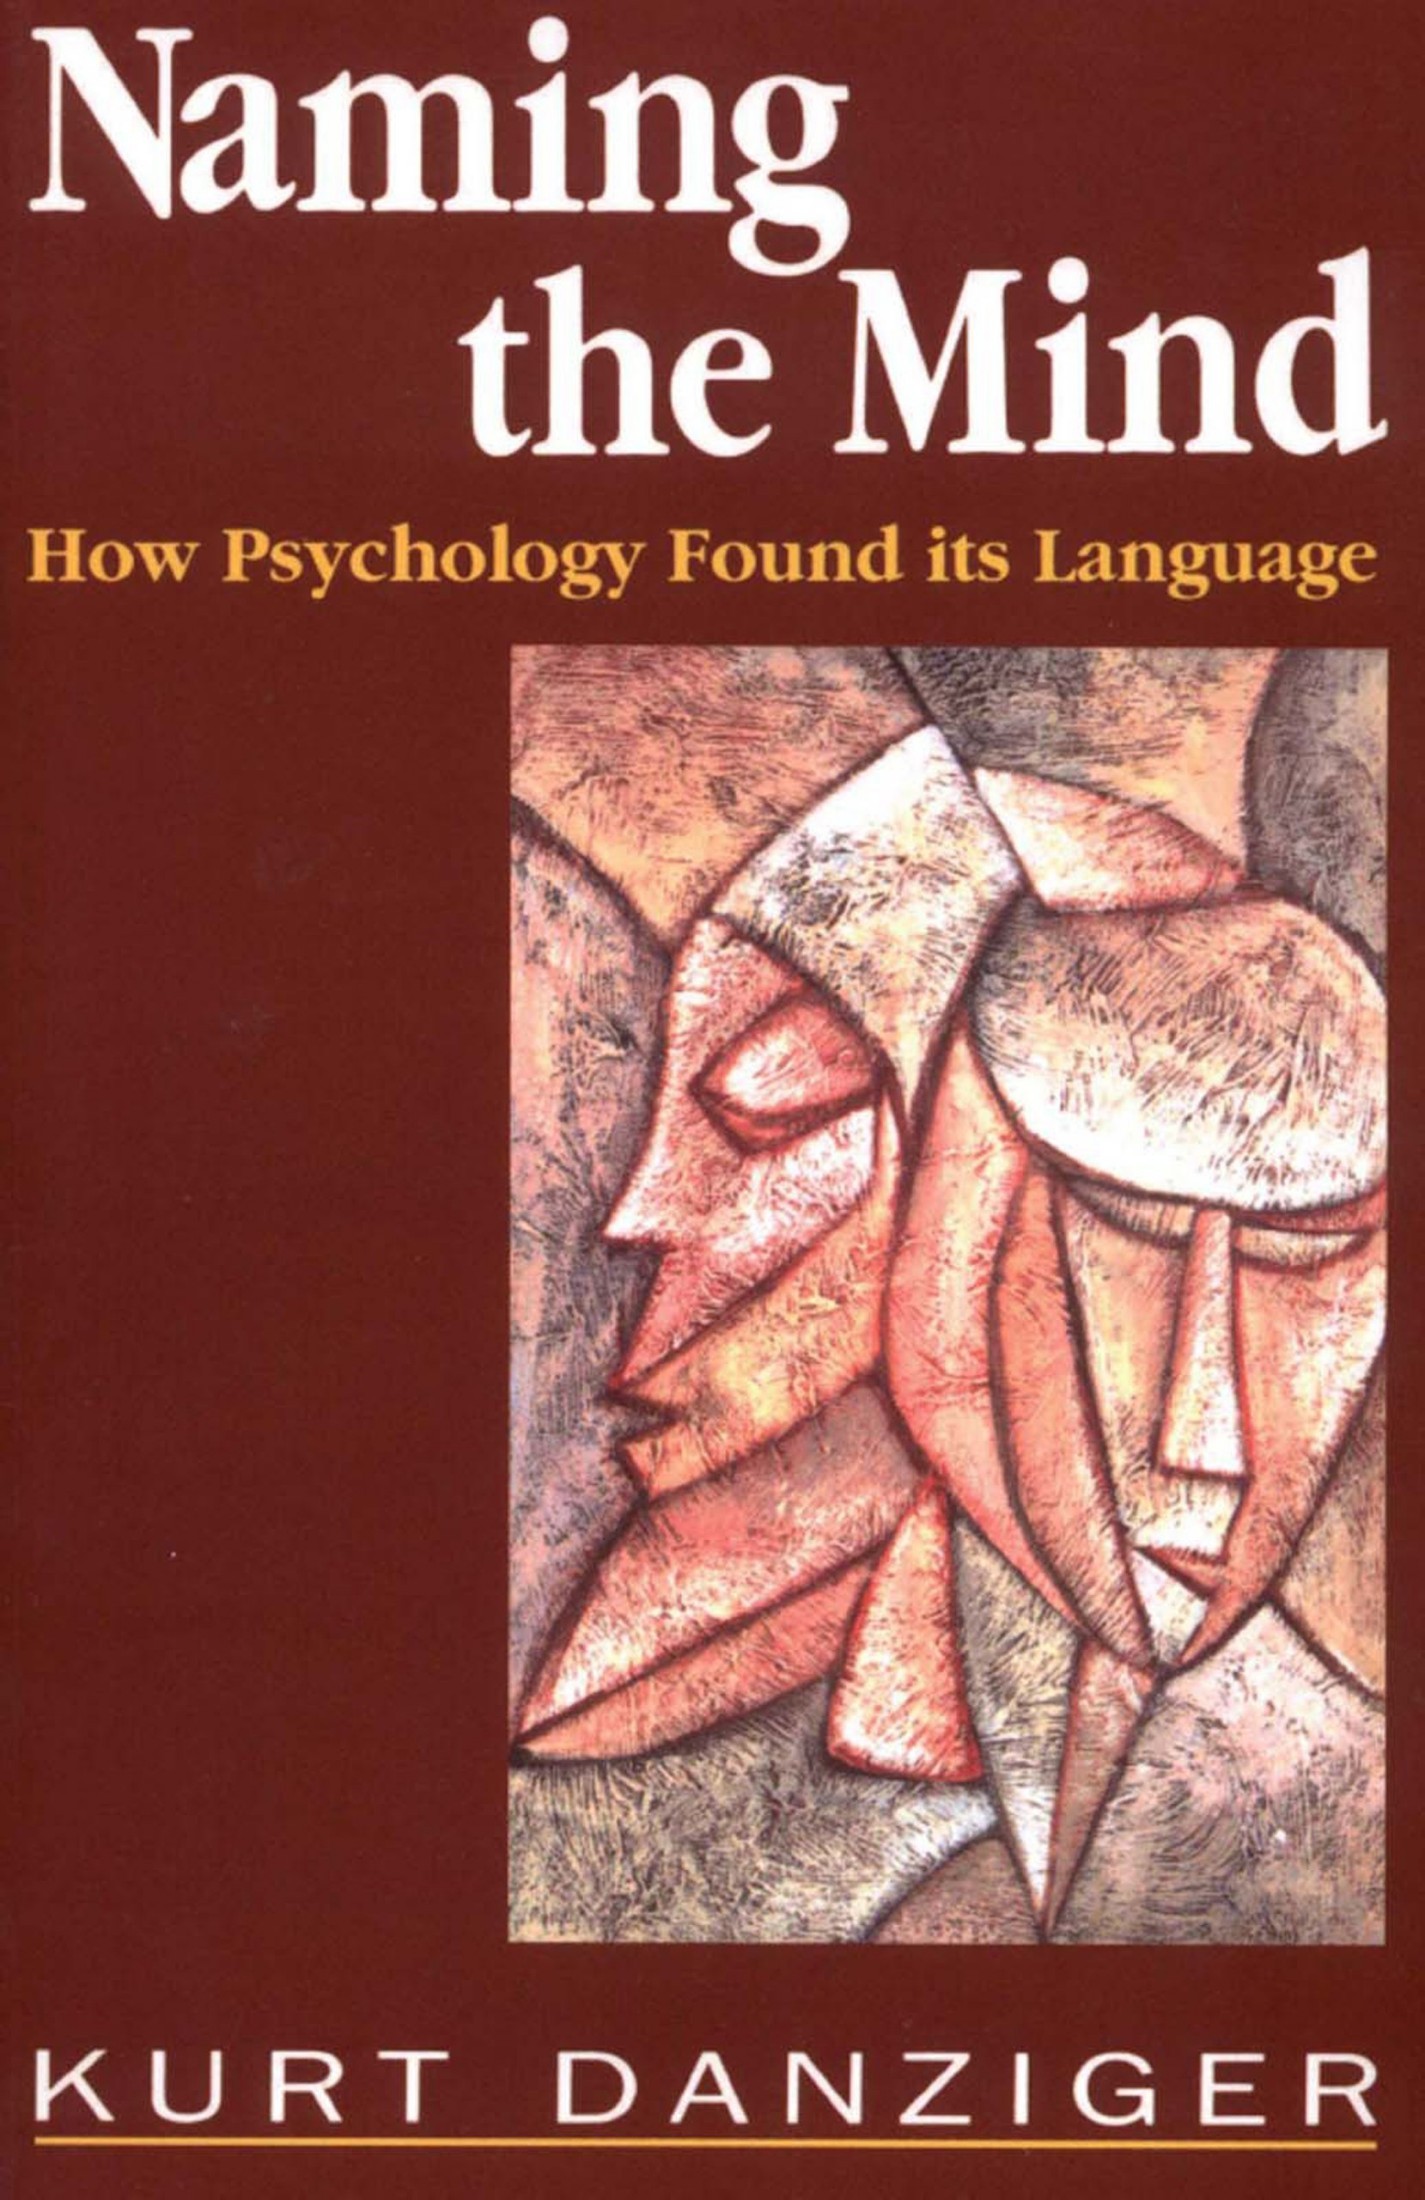 Naming the Mind: How Psychology Found Its Language